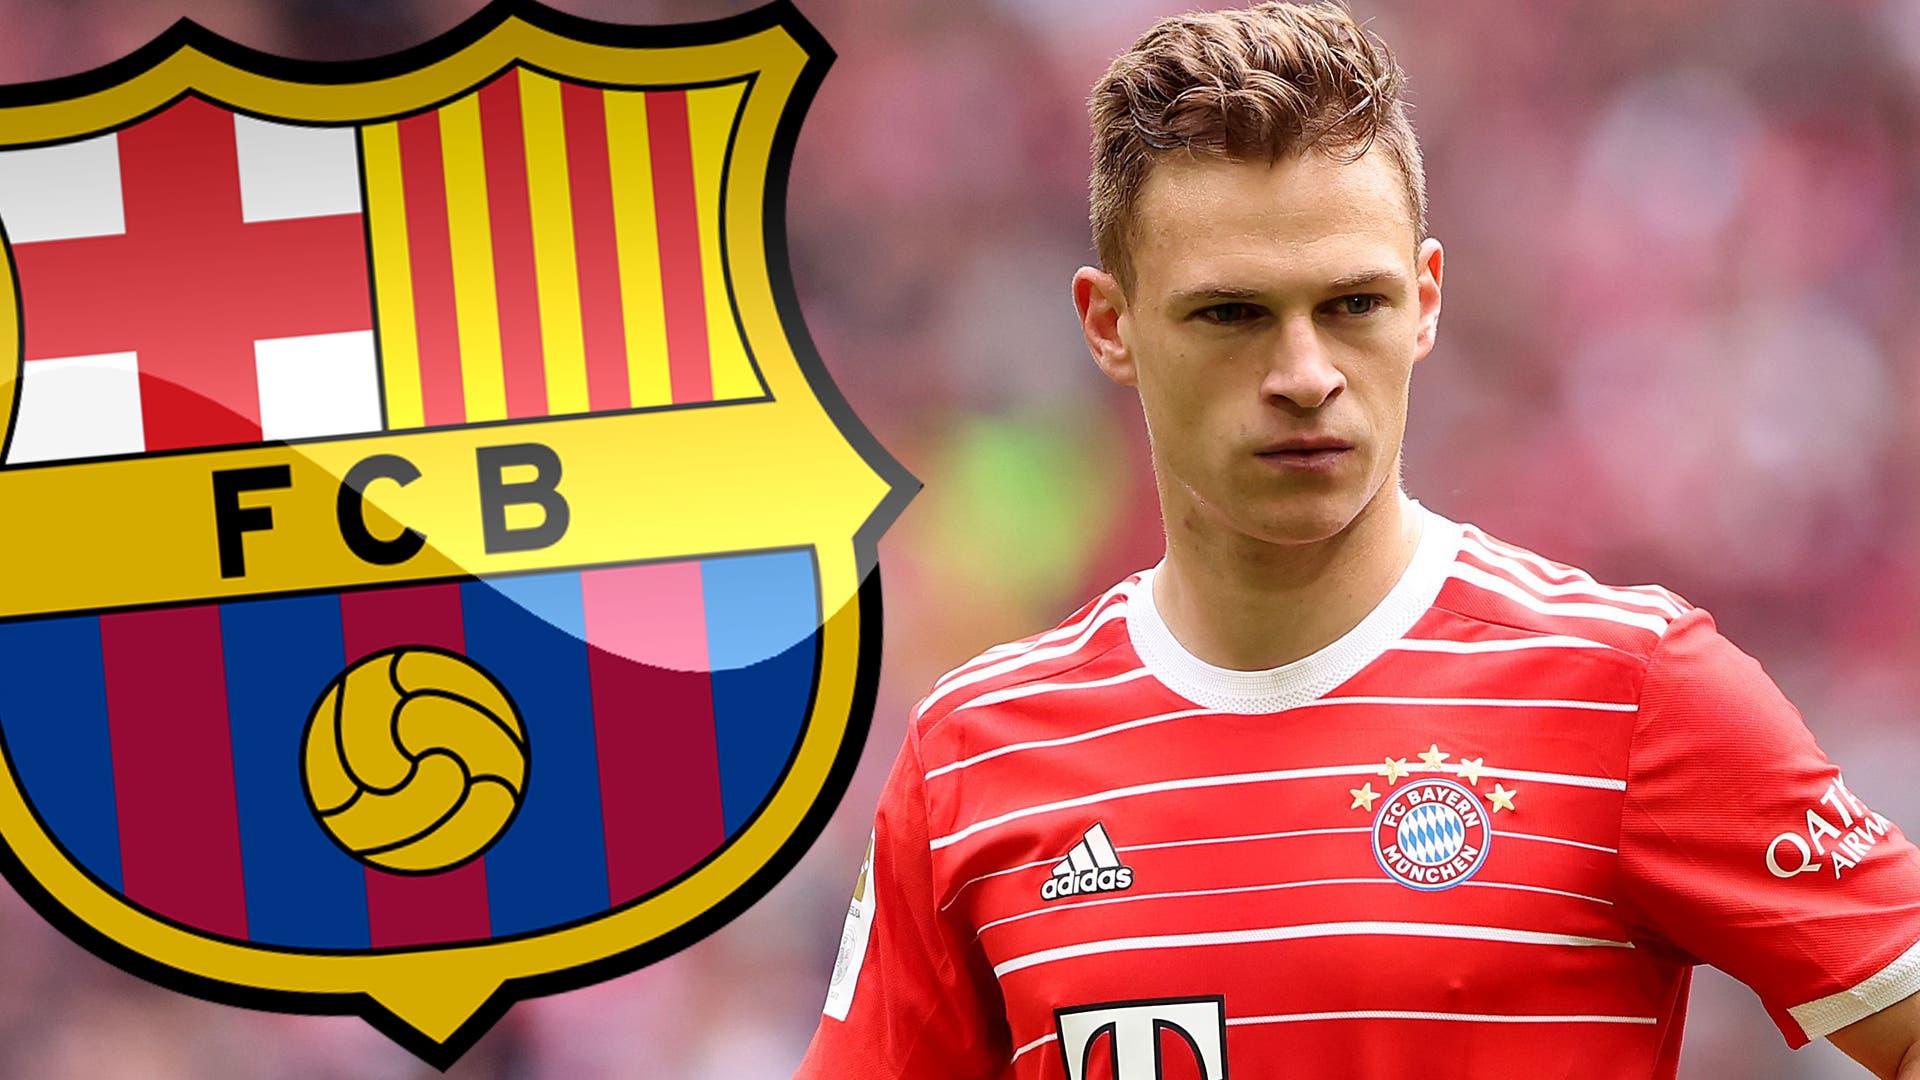 Call to Kimmich makes Bayern Munich very angry: harsh revenge on FC Barcelona
	
